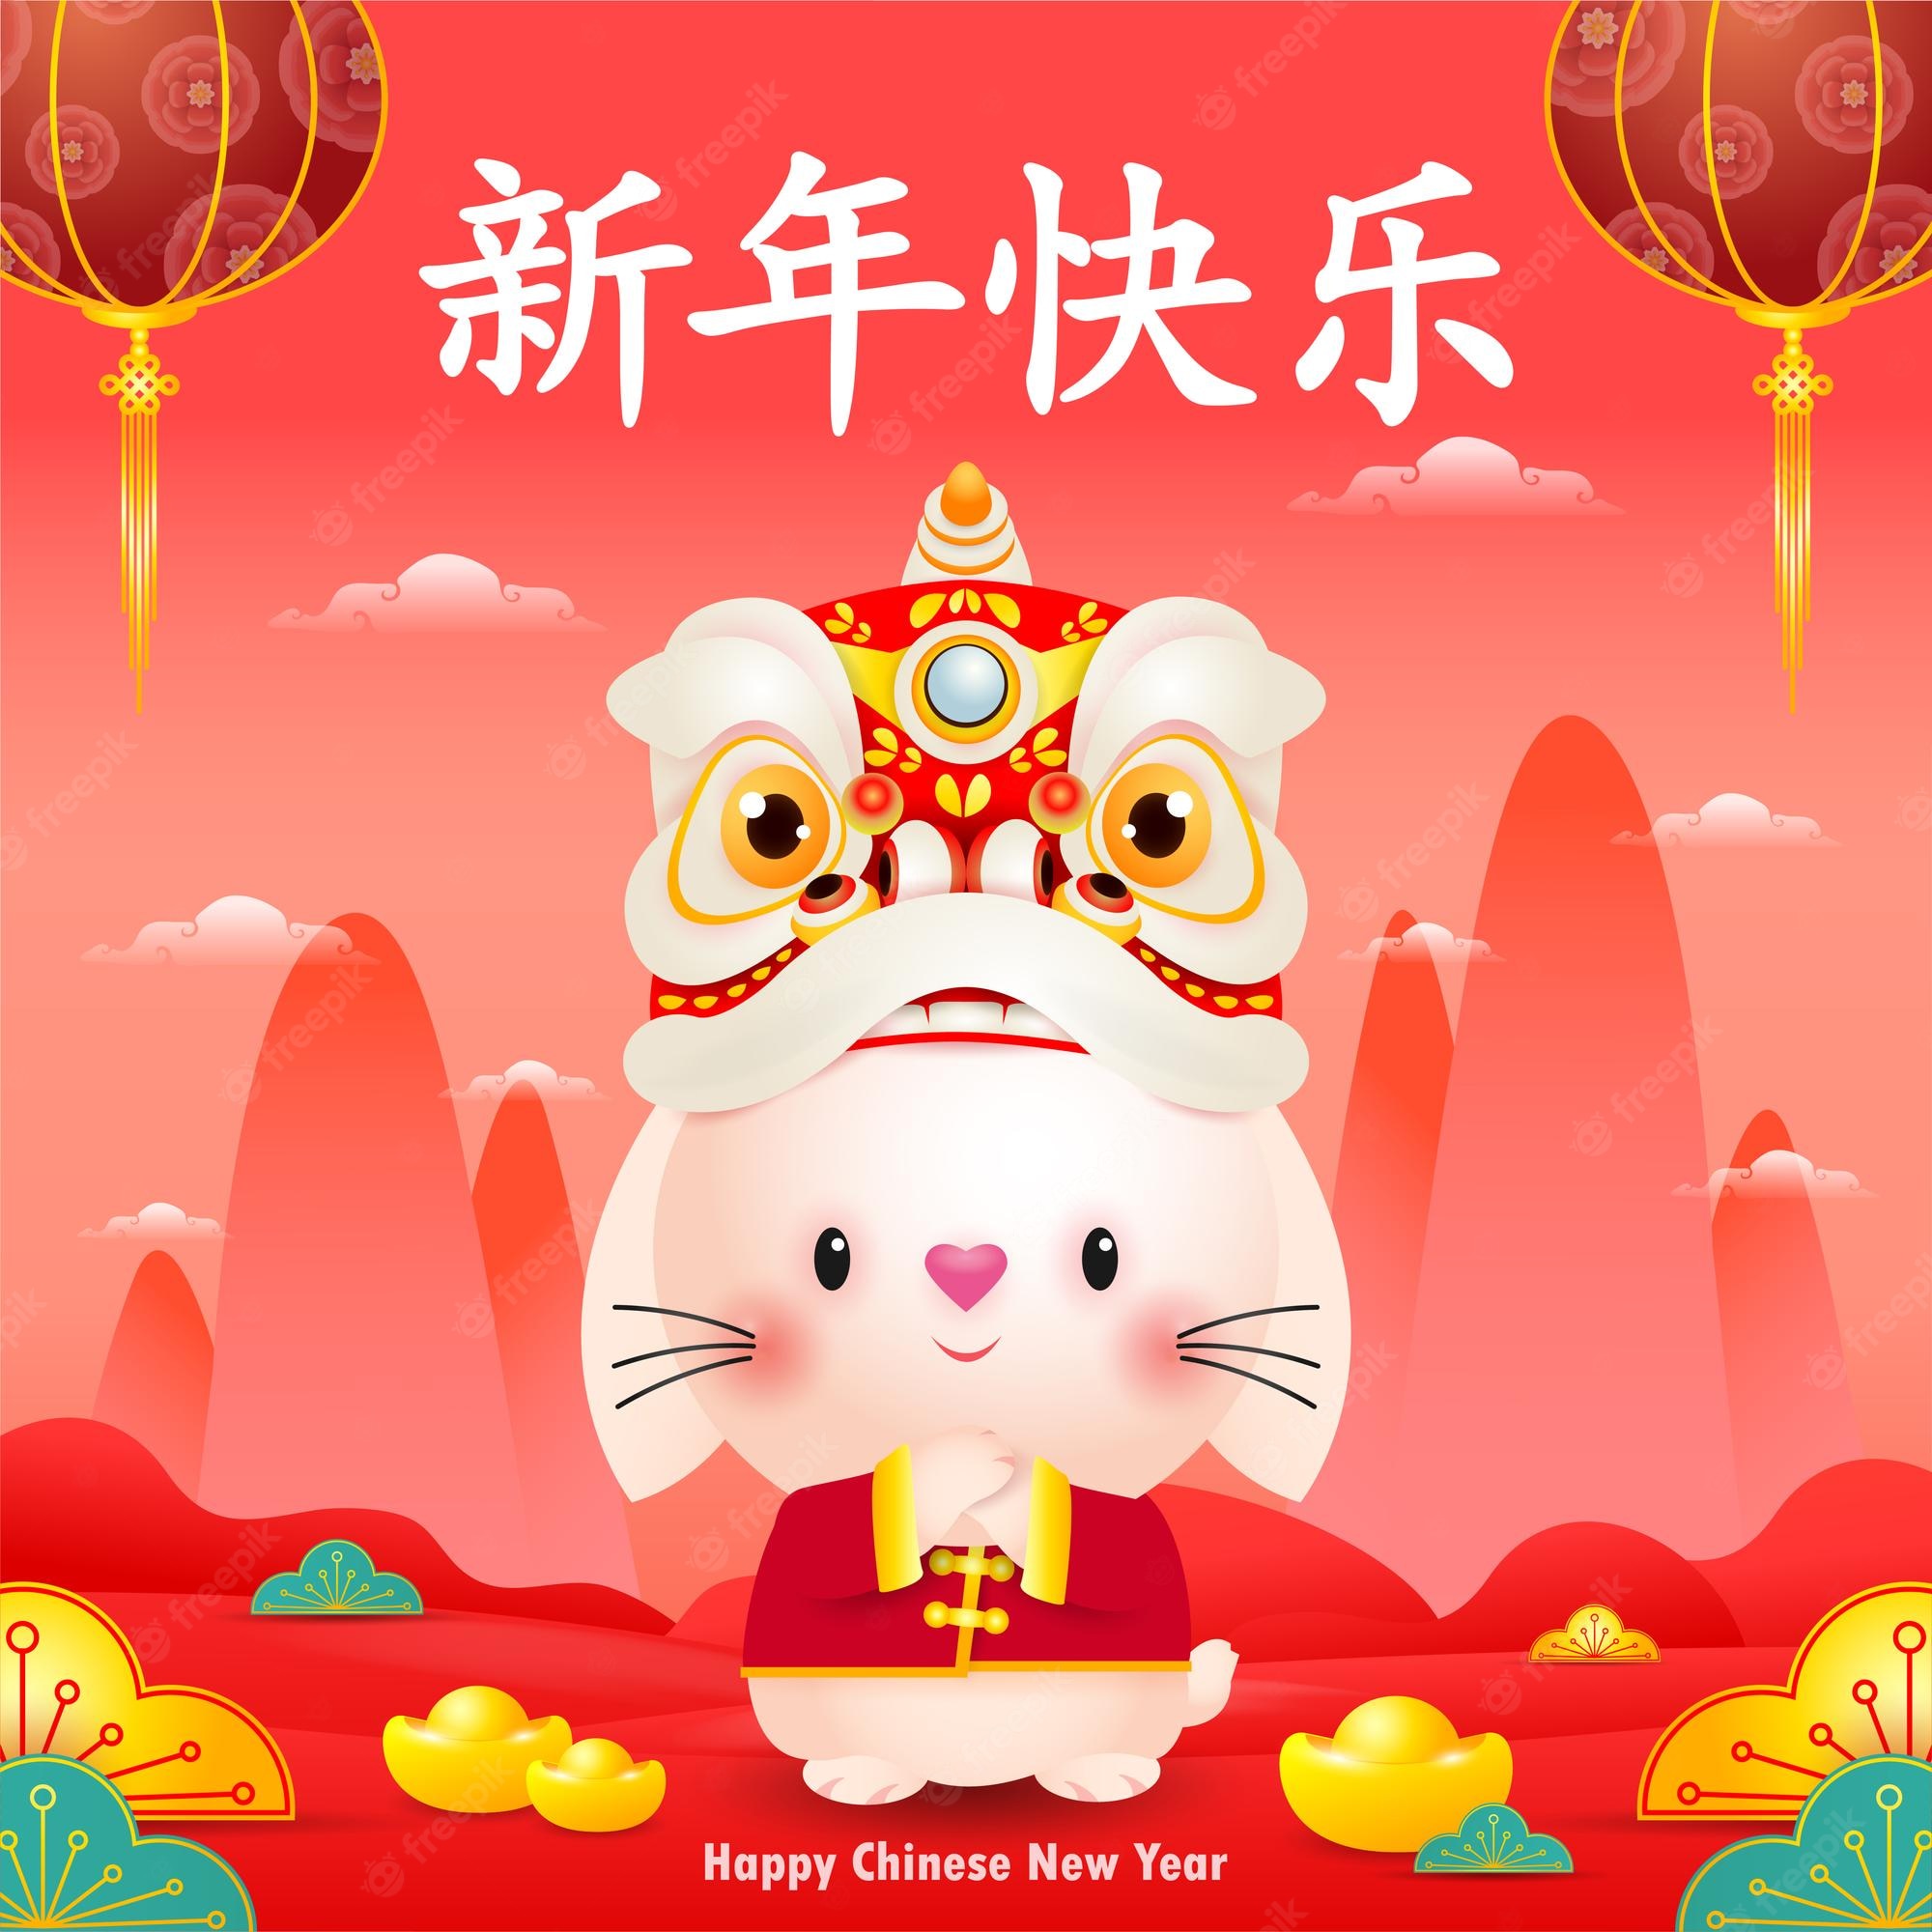 Chinese lunar new year 2023 Image. Free Vectors, & PSD